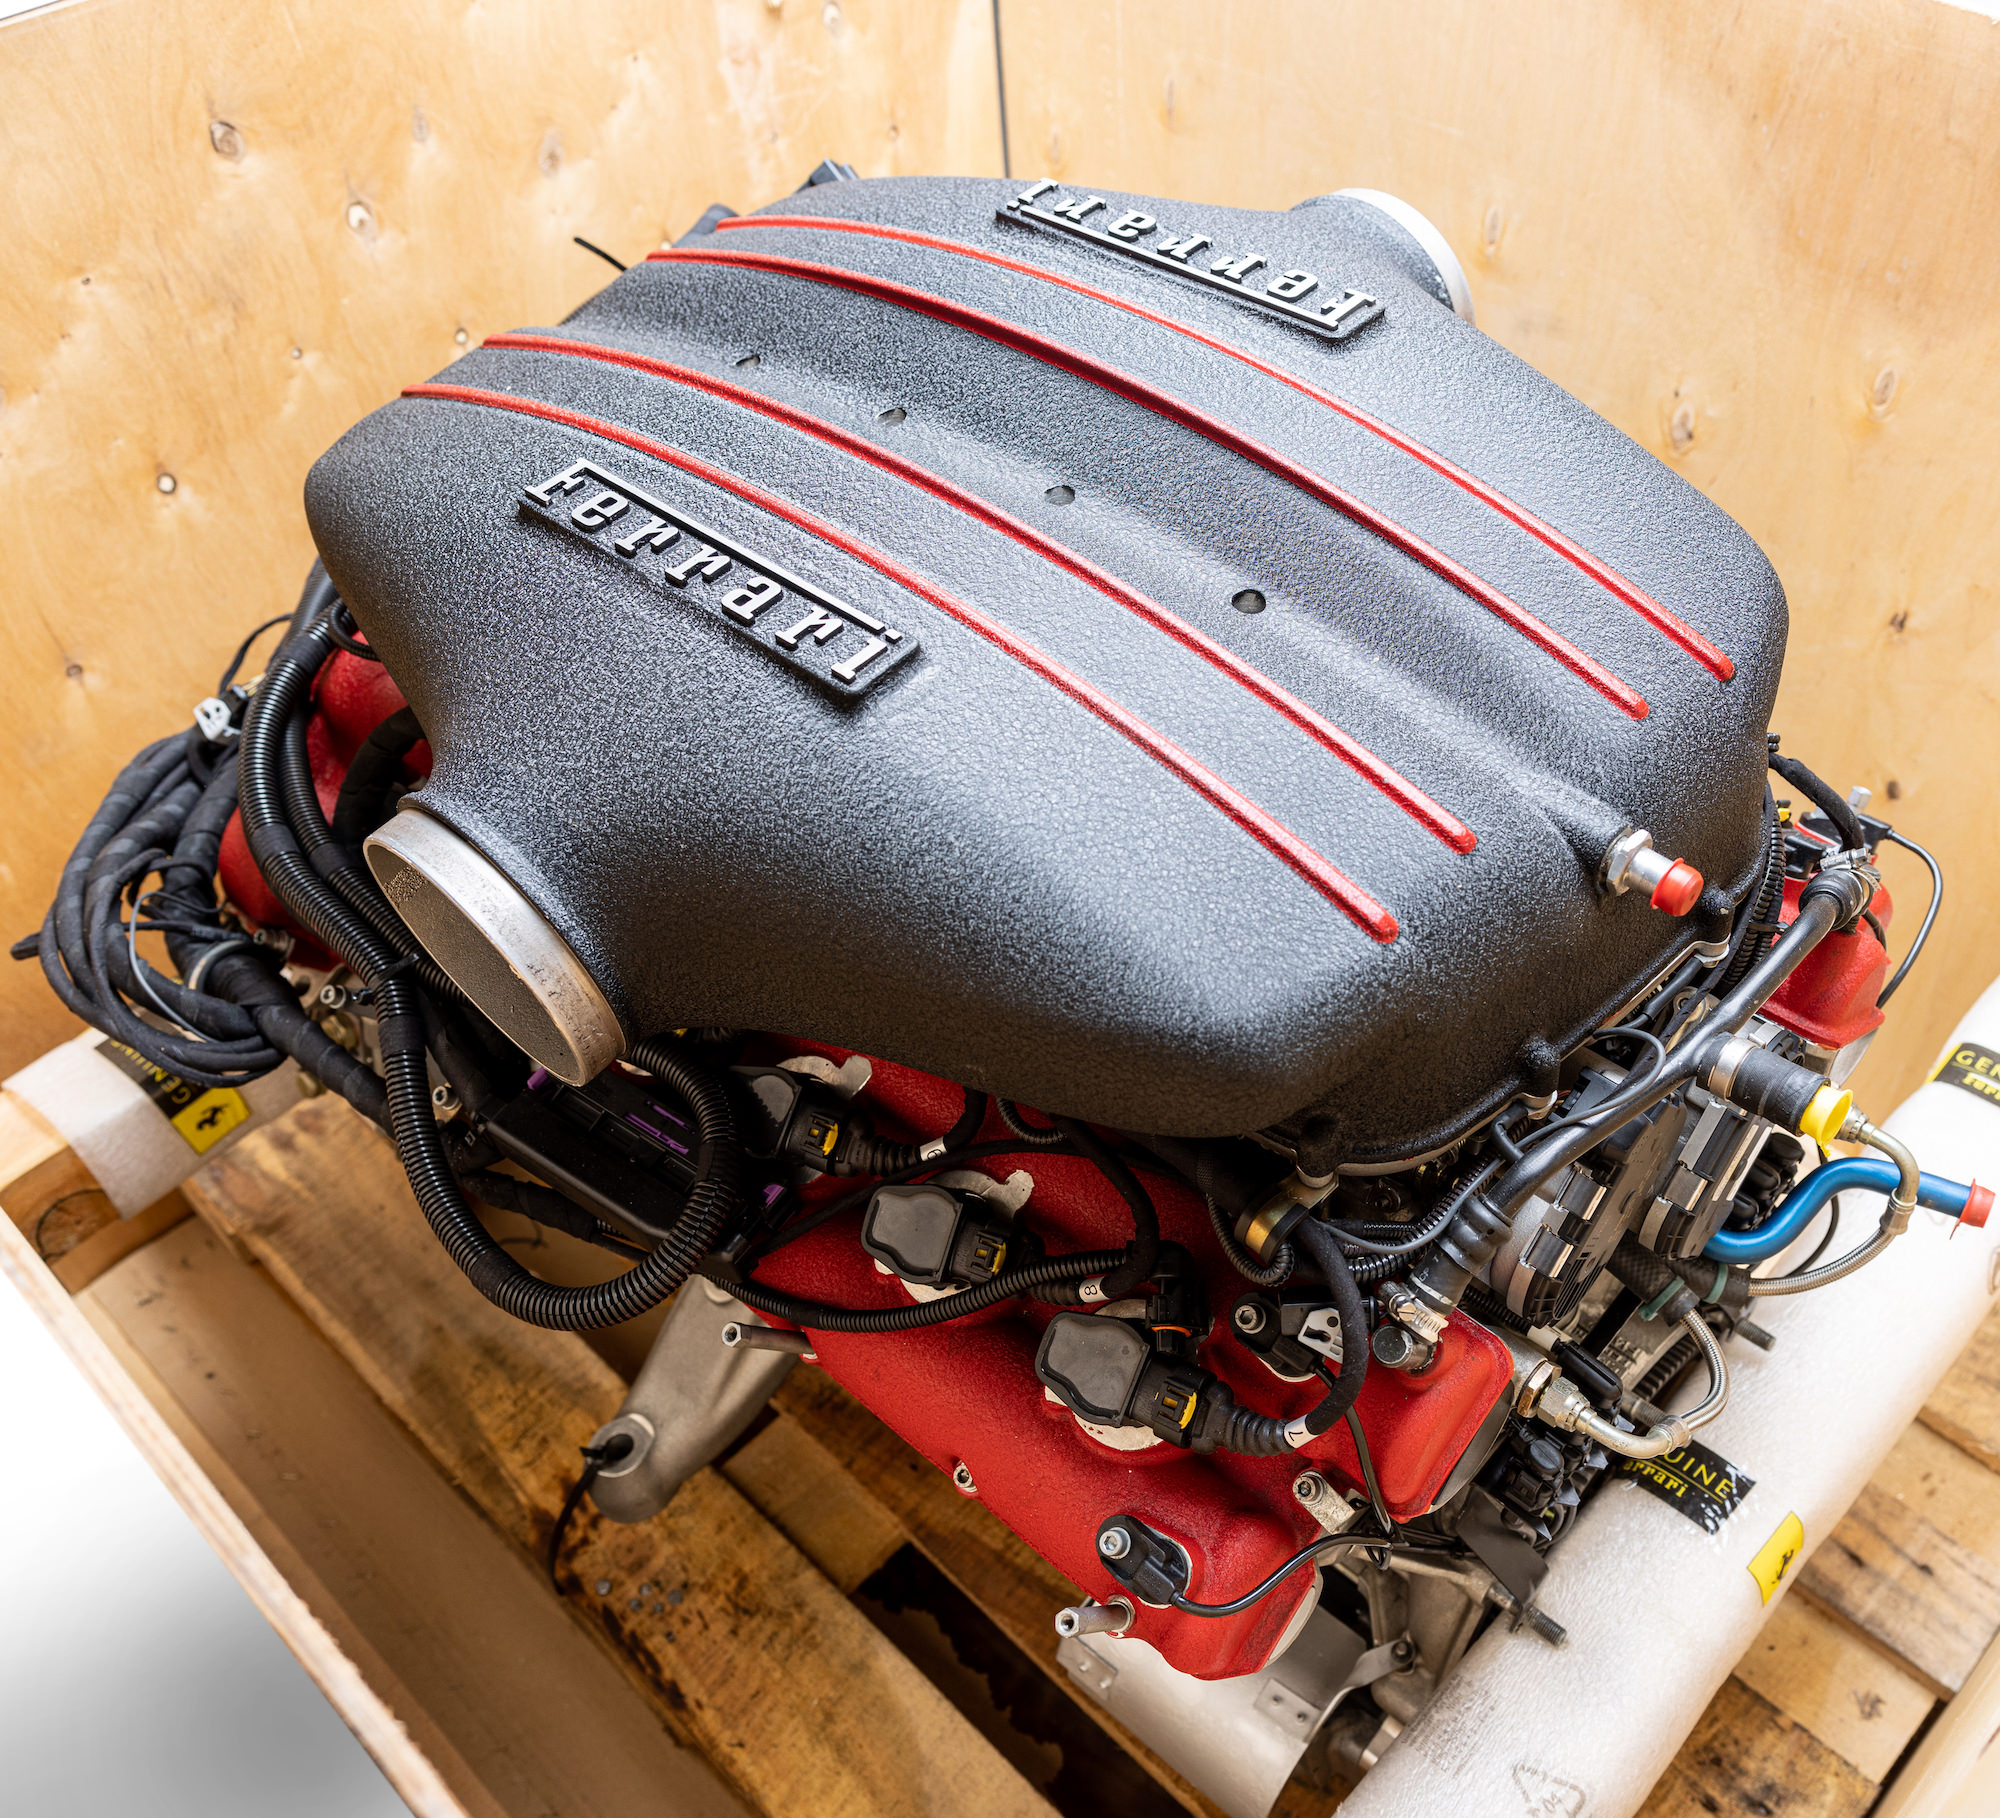 This Ferrari Enzo V12 Crate Engine For Sale Is Ready for the